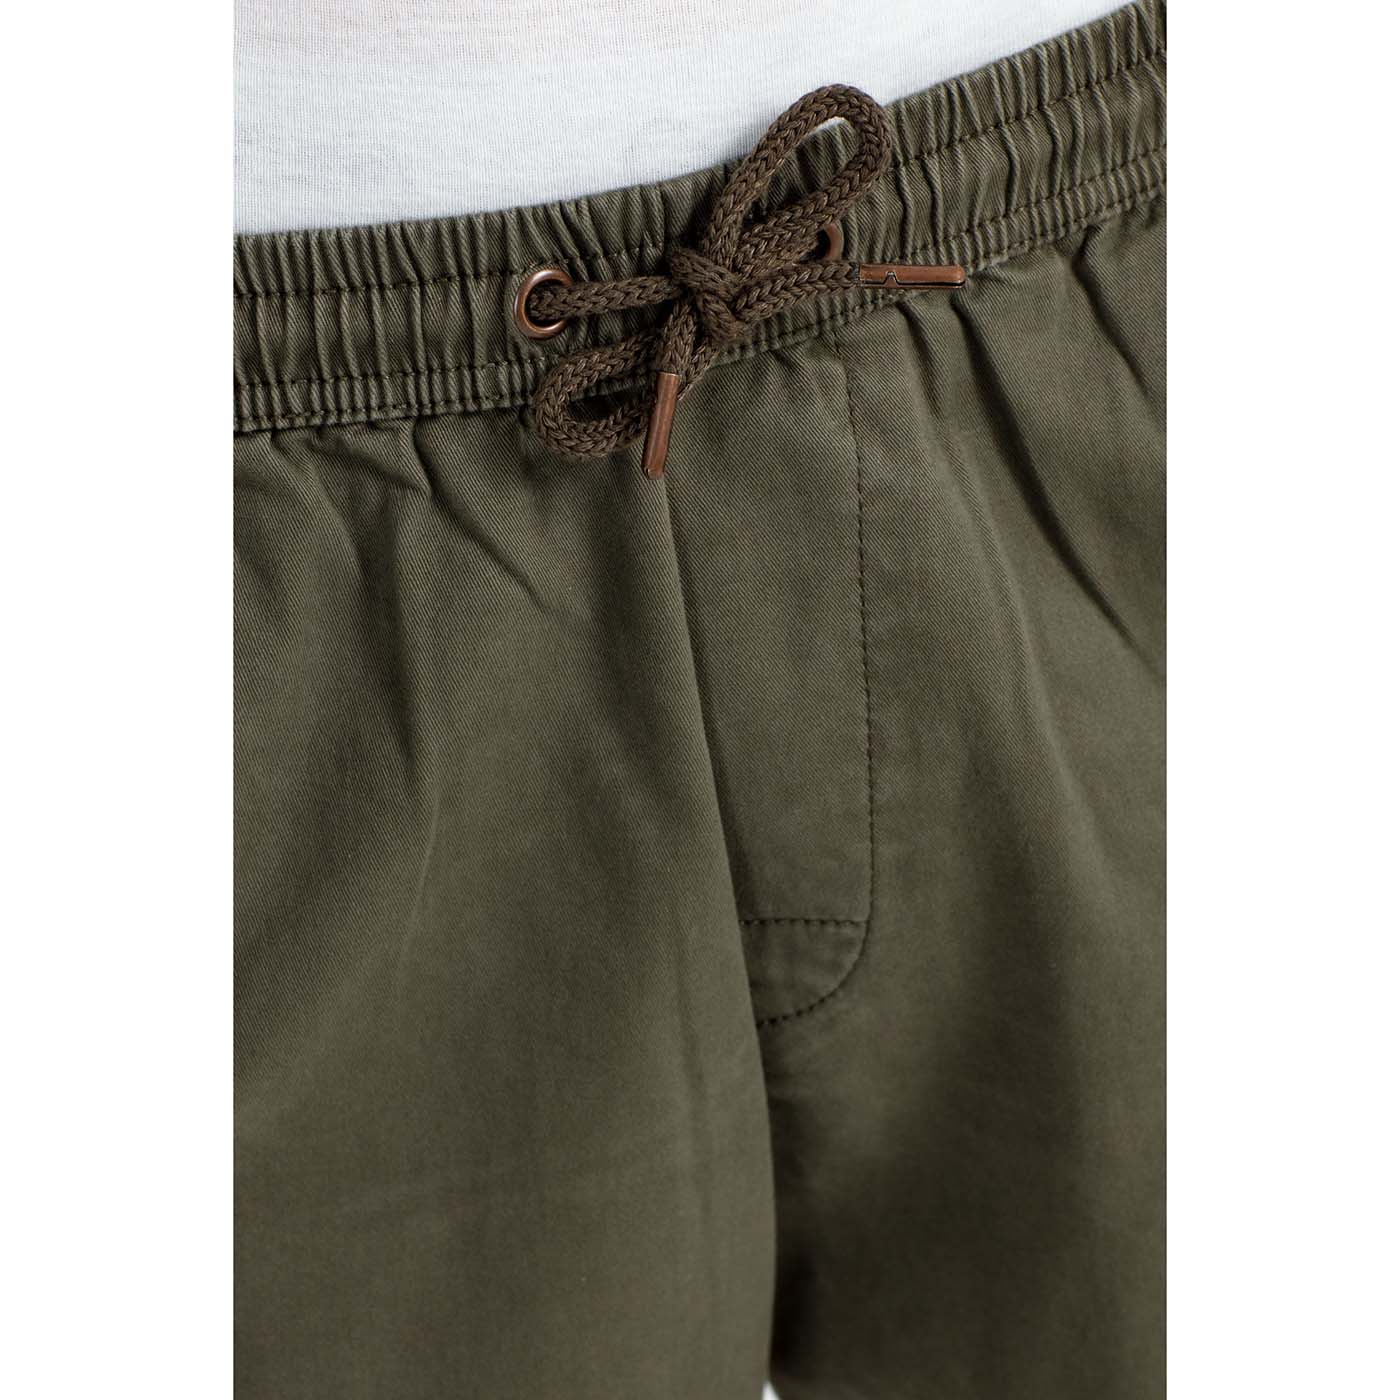 Reell Jeans Reflex Easy Cargo Short Olive